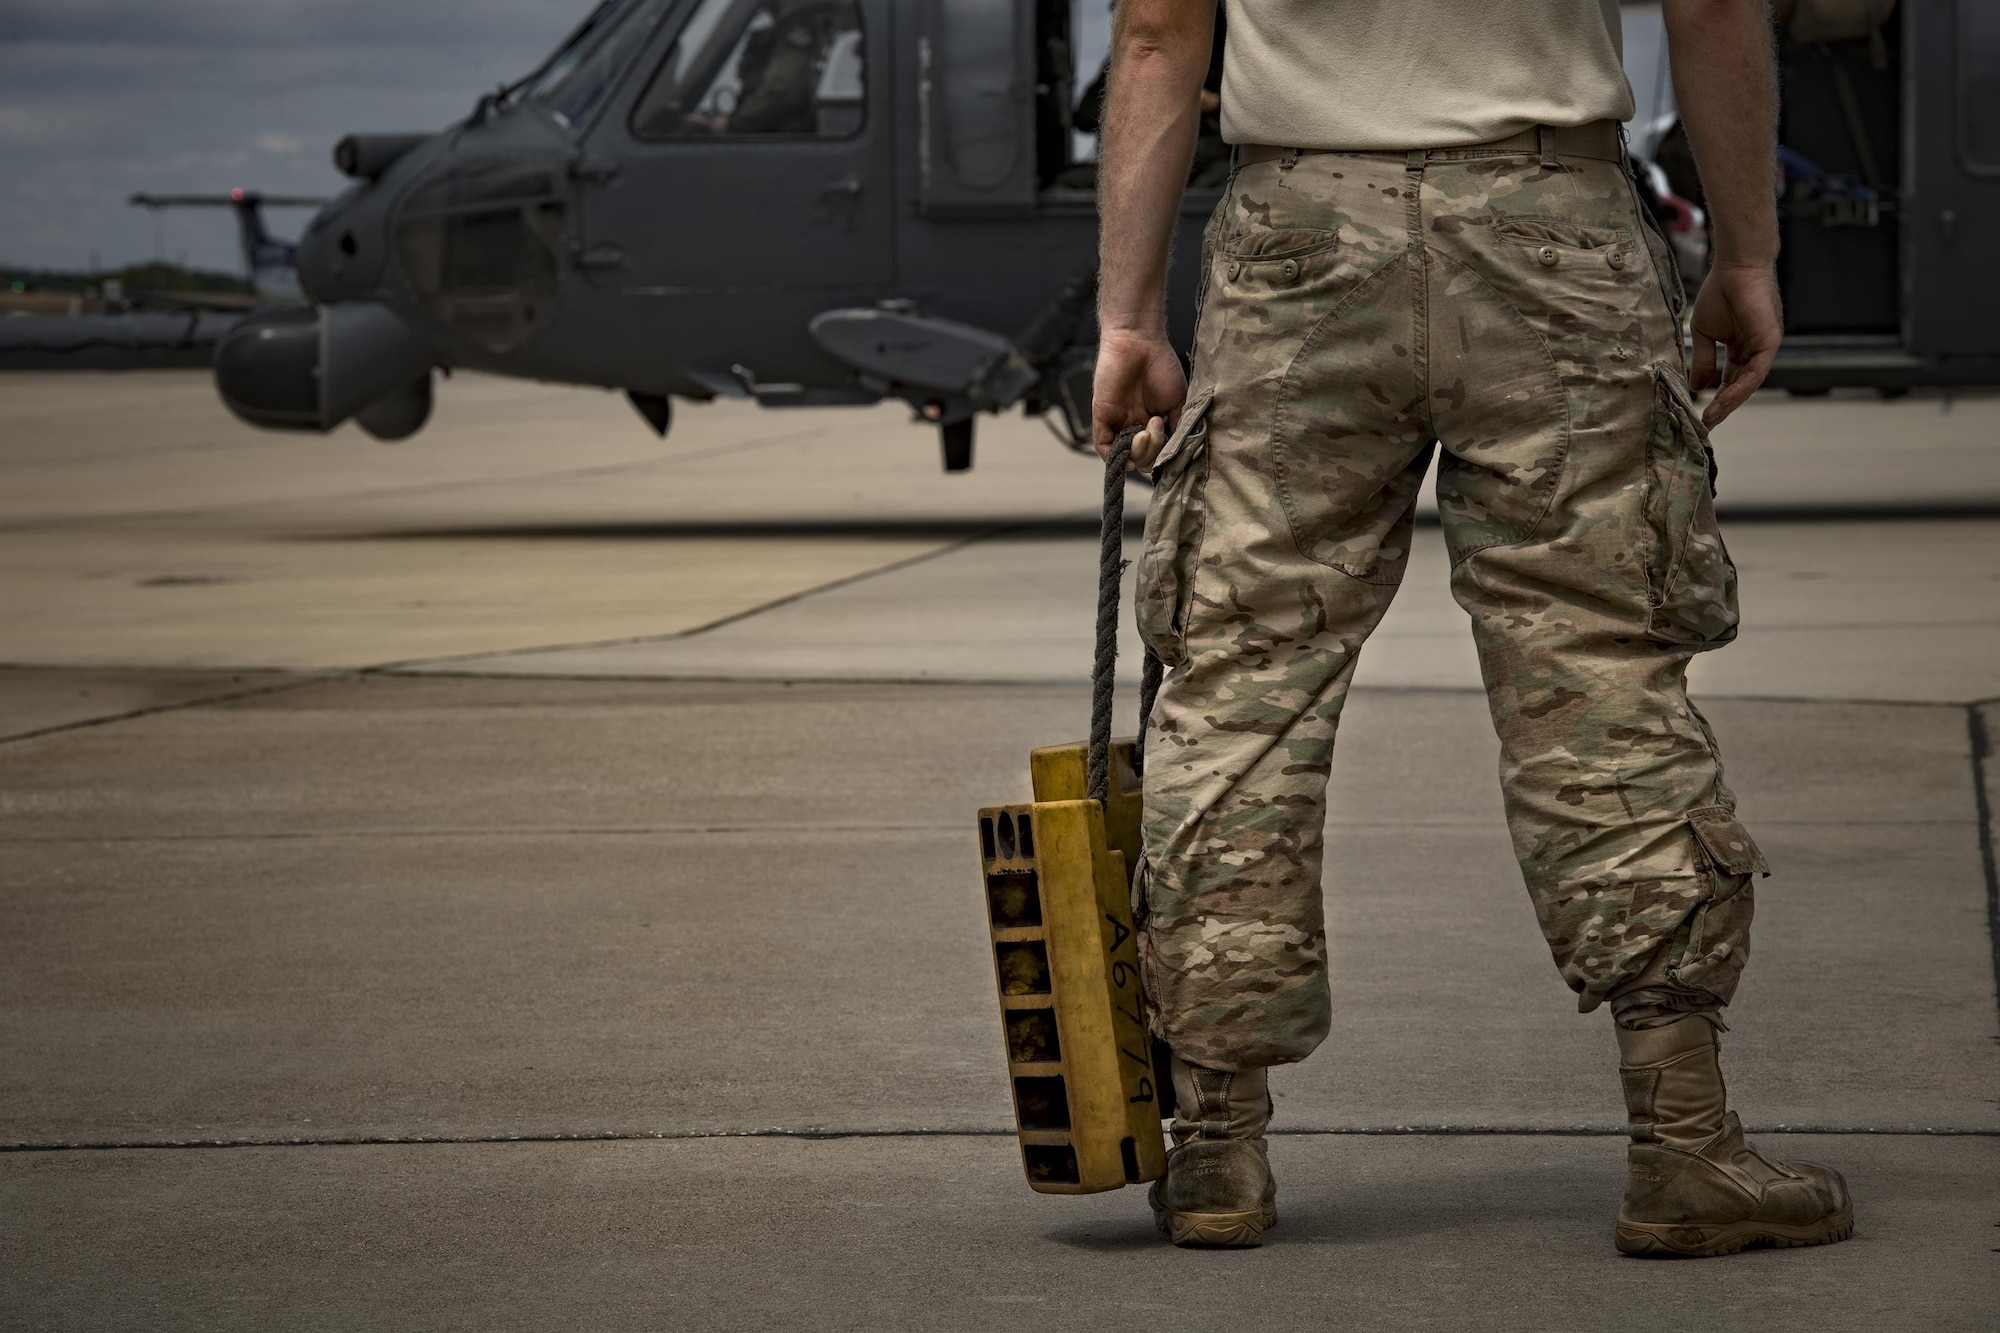 A maintainer from the 41st Helicopter Maintenance Unit waits to bring chocks to an HH-60G Pave Hawk after it completed a sortie in support of Hurricane Harvey relief efforts, Aug. 29, 2017, at Easterwood Airport, College Station, Texas.